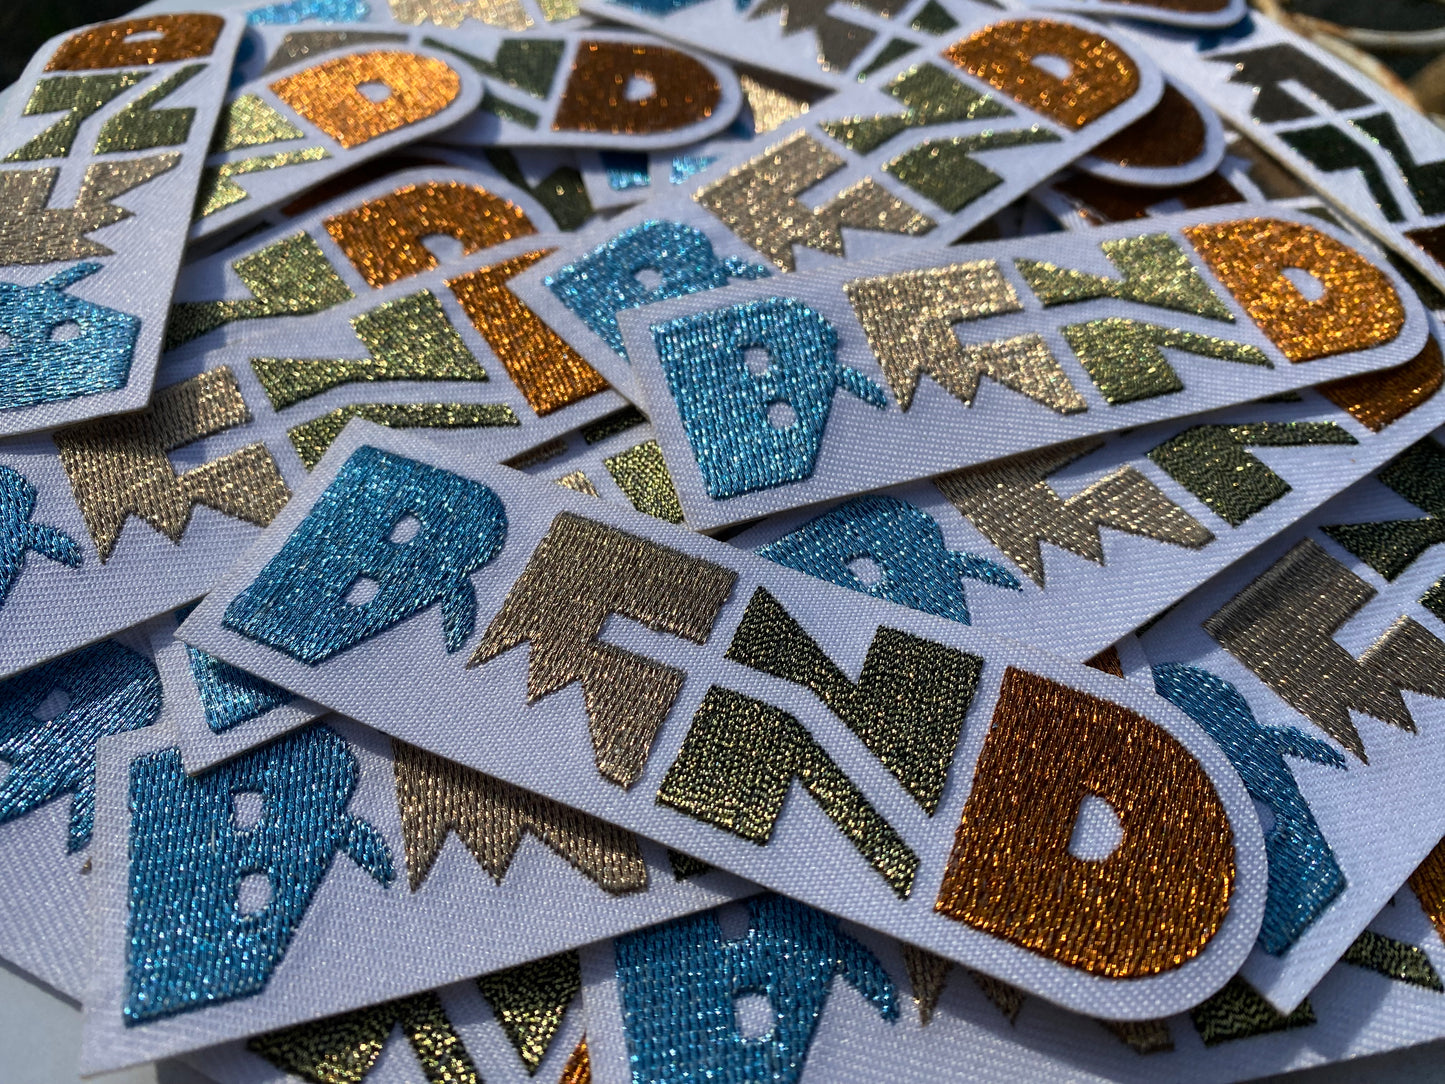 Bend Bend | Embroidered Iron-on Patch